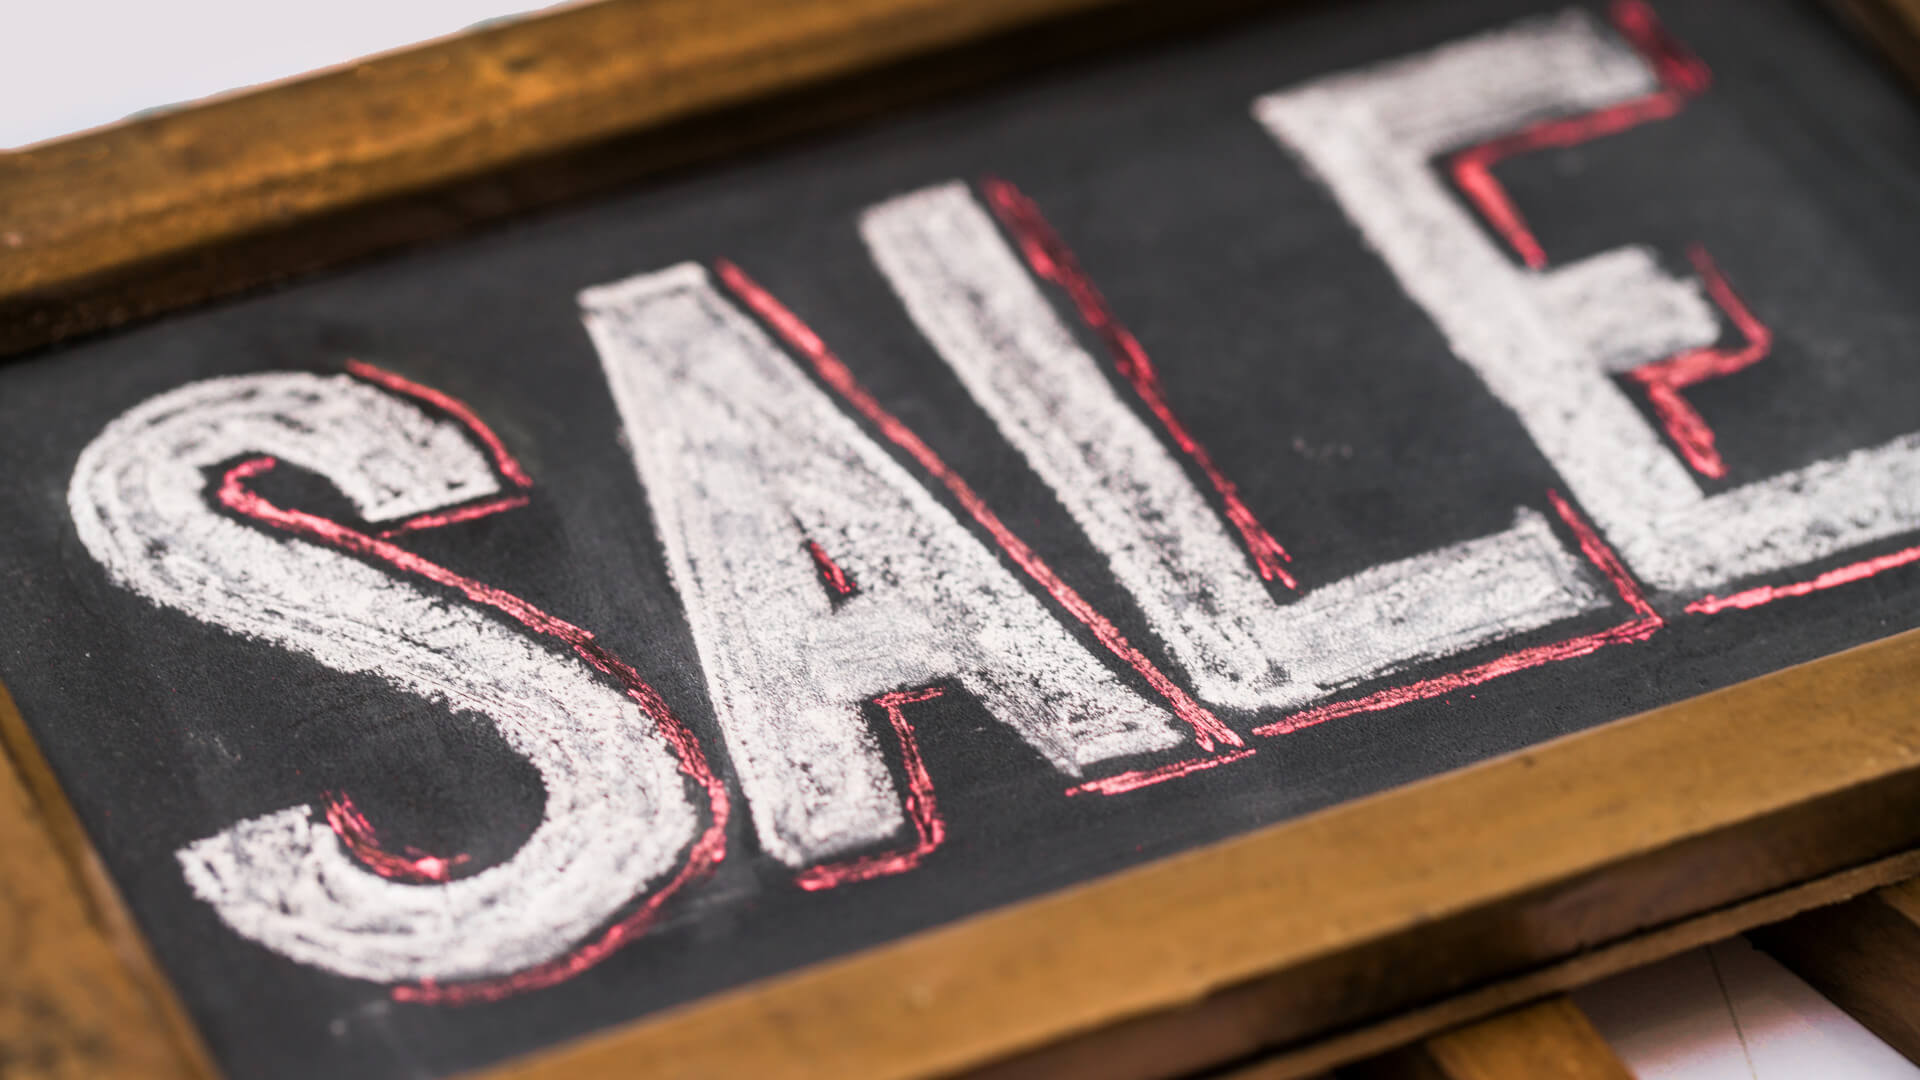 Direct4x4 On Sale and clearance accessories with "Sale" on a wooden framed chalk board.